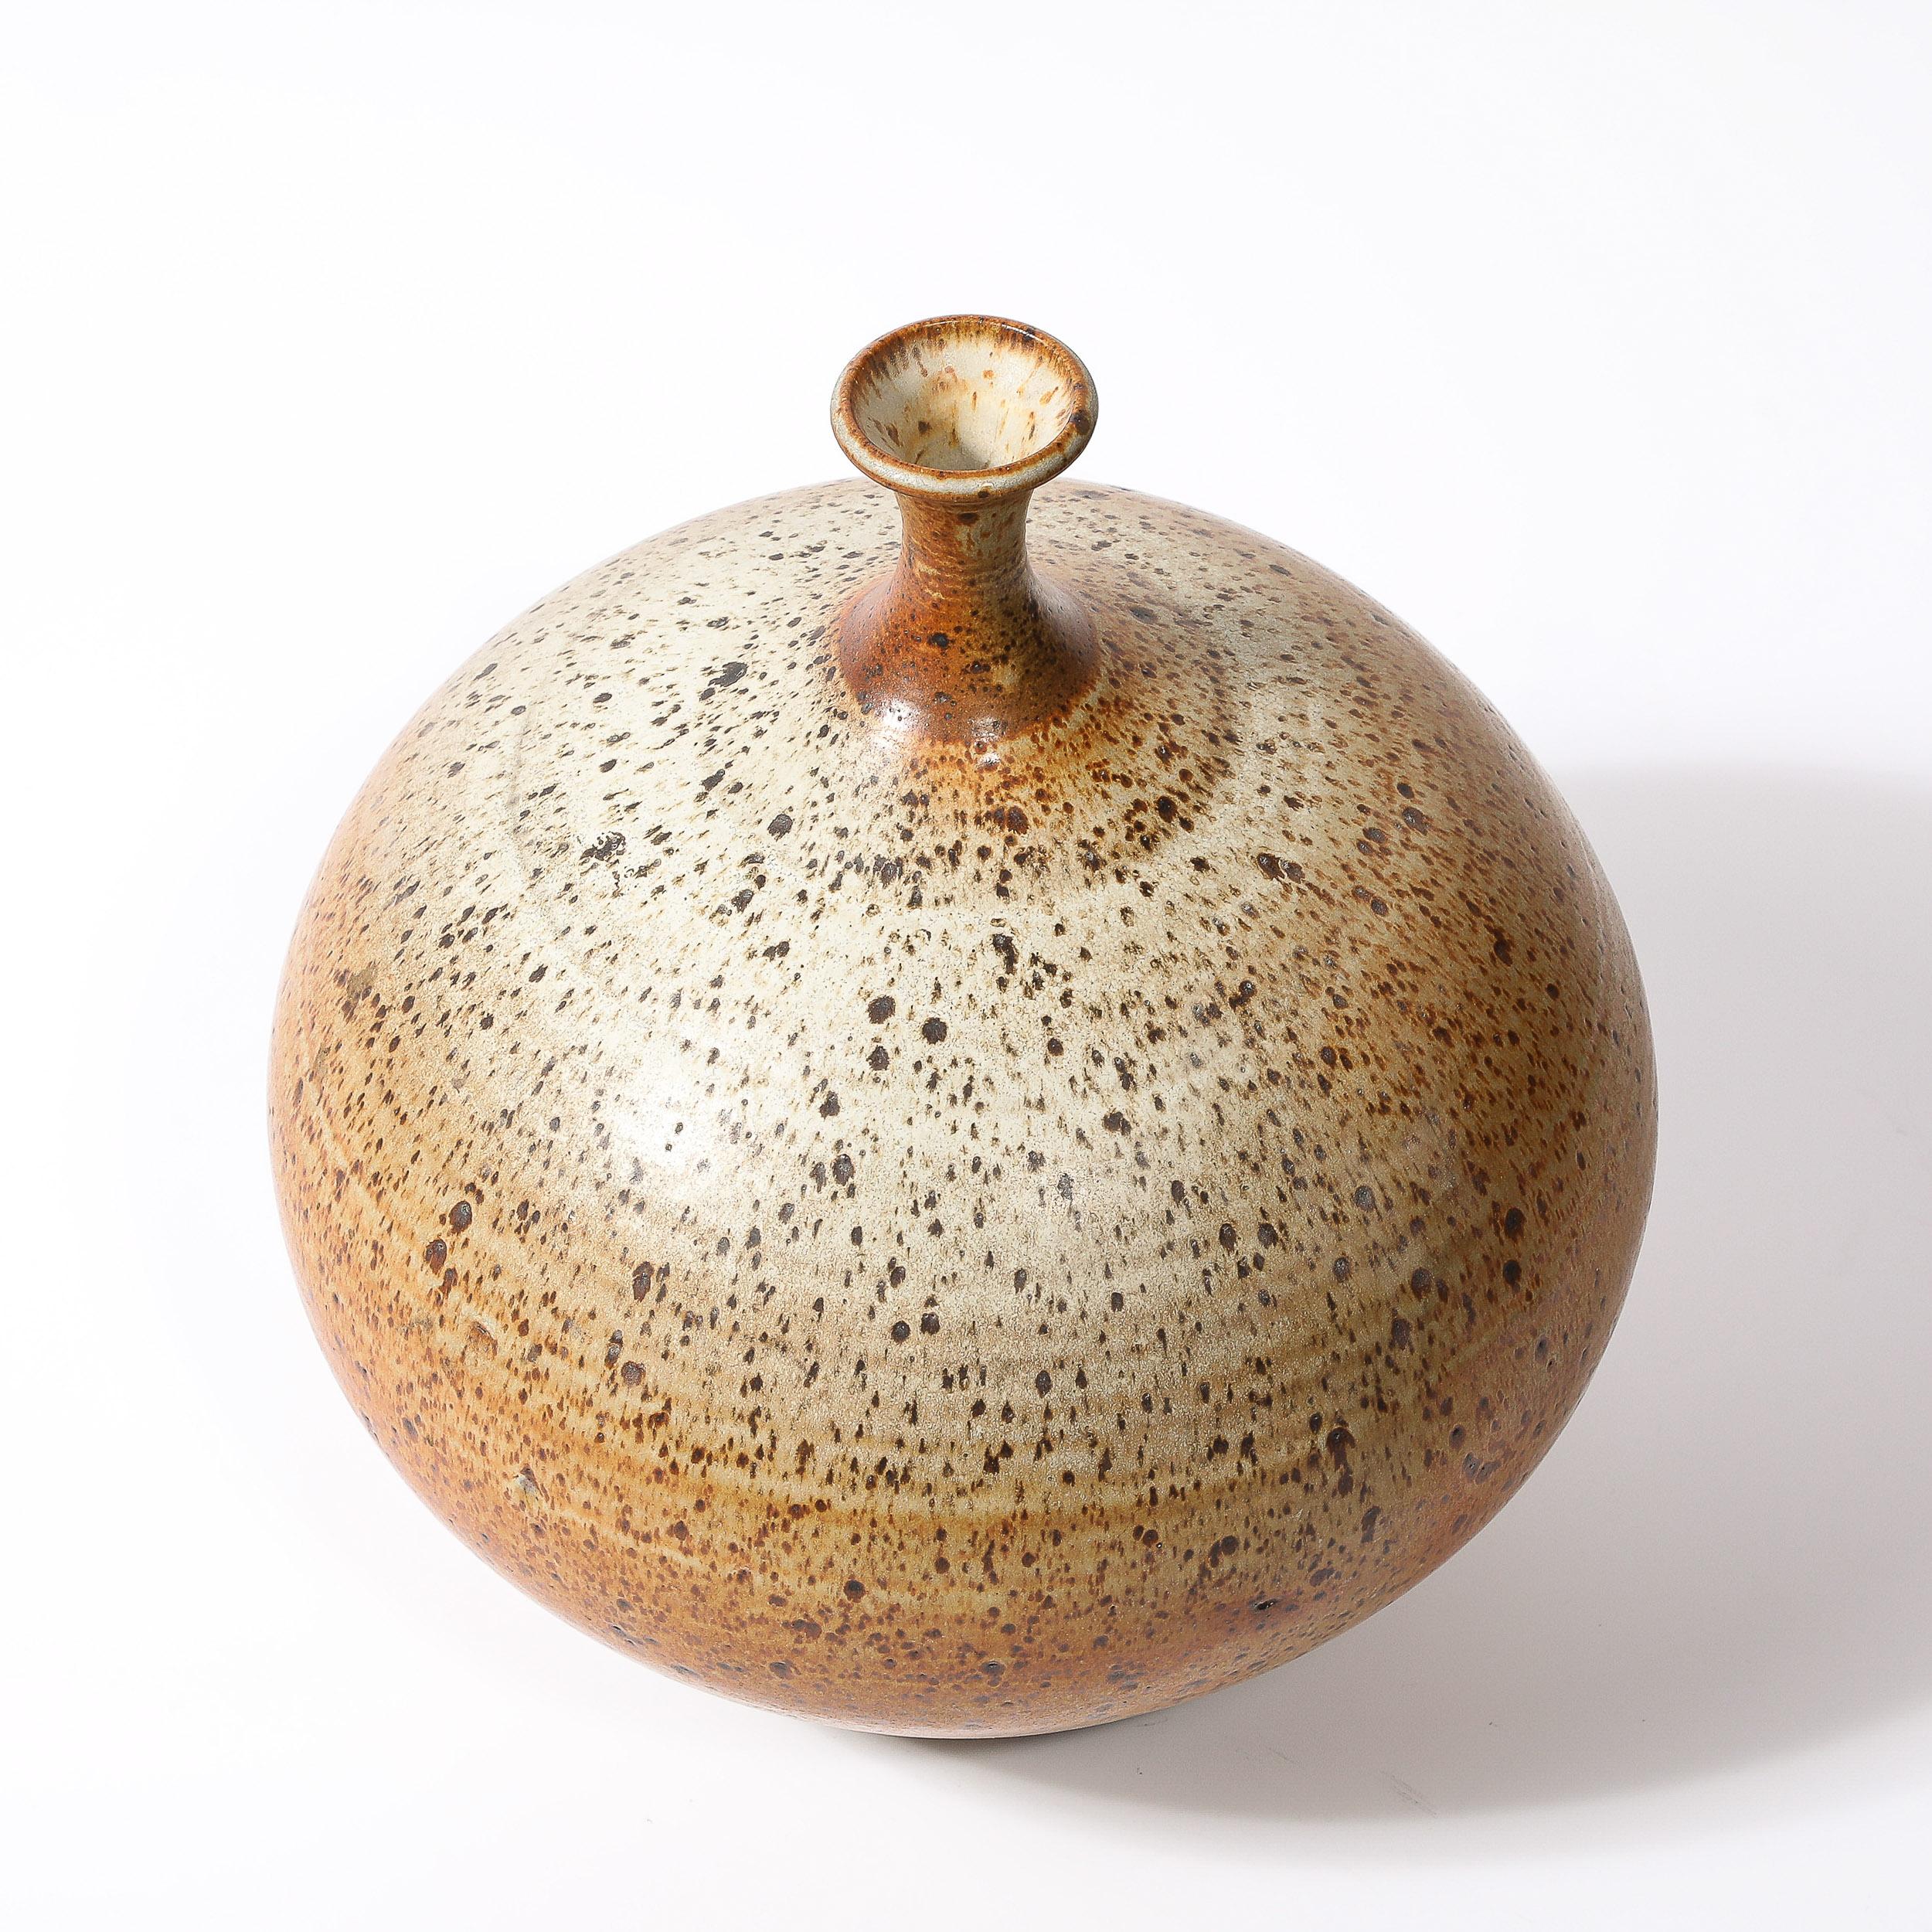 This beautifully formed and materially sensitive Mid-Century Modernist Round Speckled Earth Tone Ceramic Vase W/ Tapered Neck originates from the United States, Circa 1960. Features a narrow tapered neck that leads to a beautifully rounded body